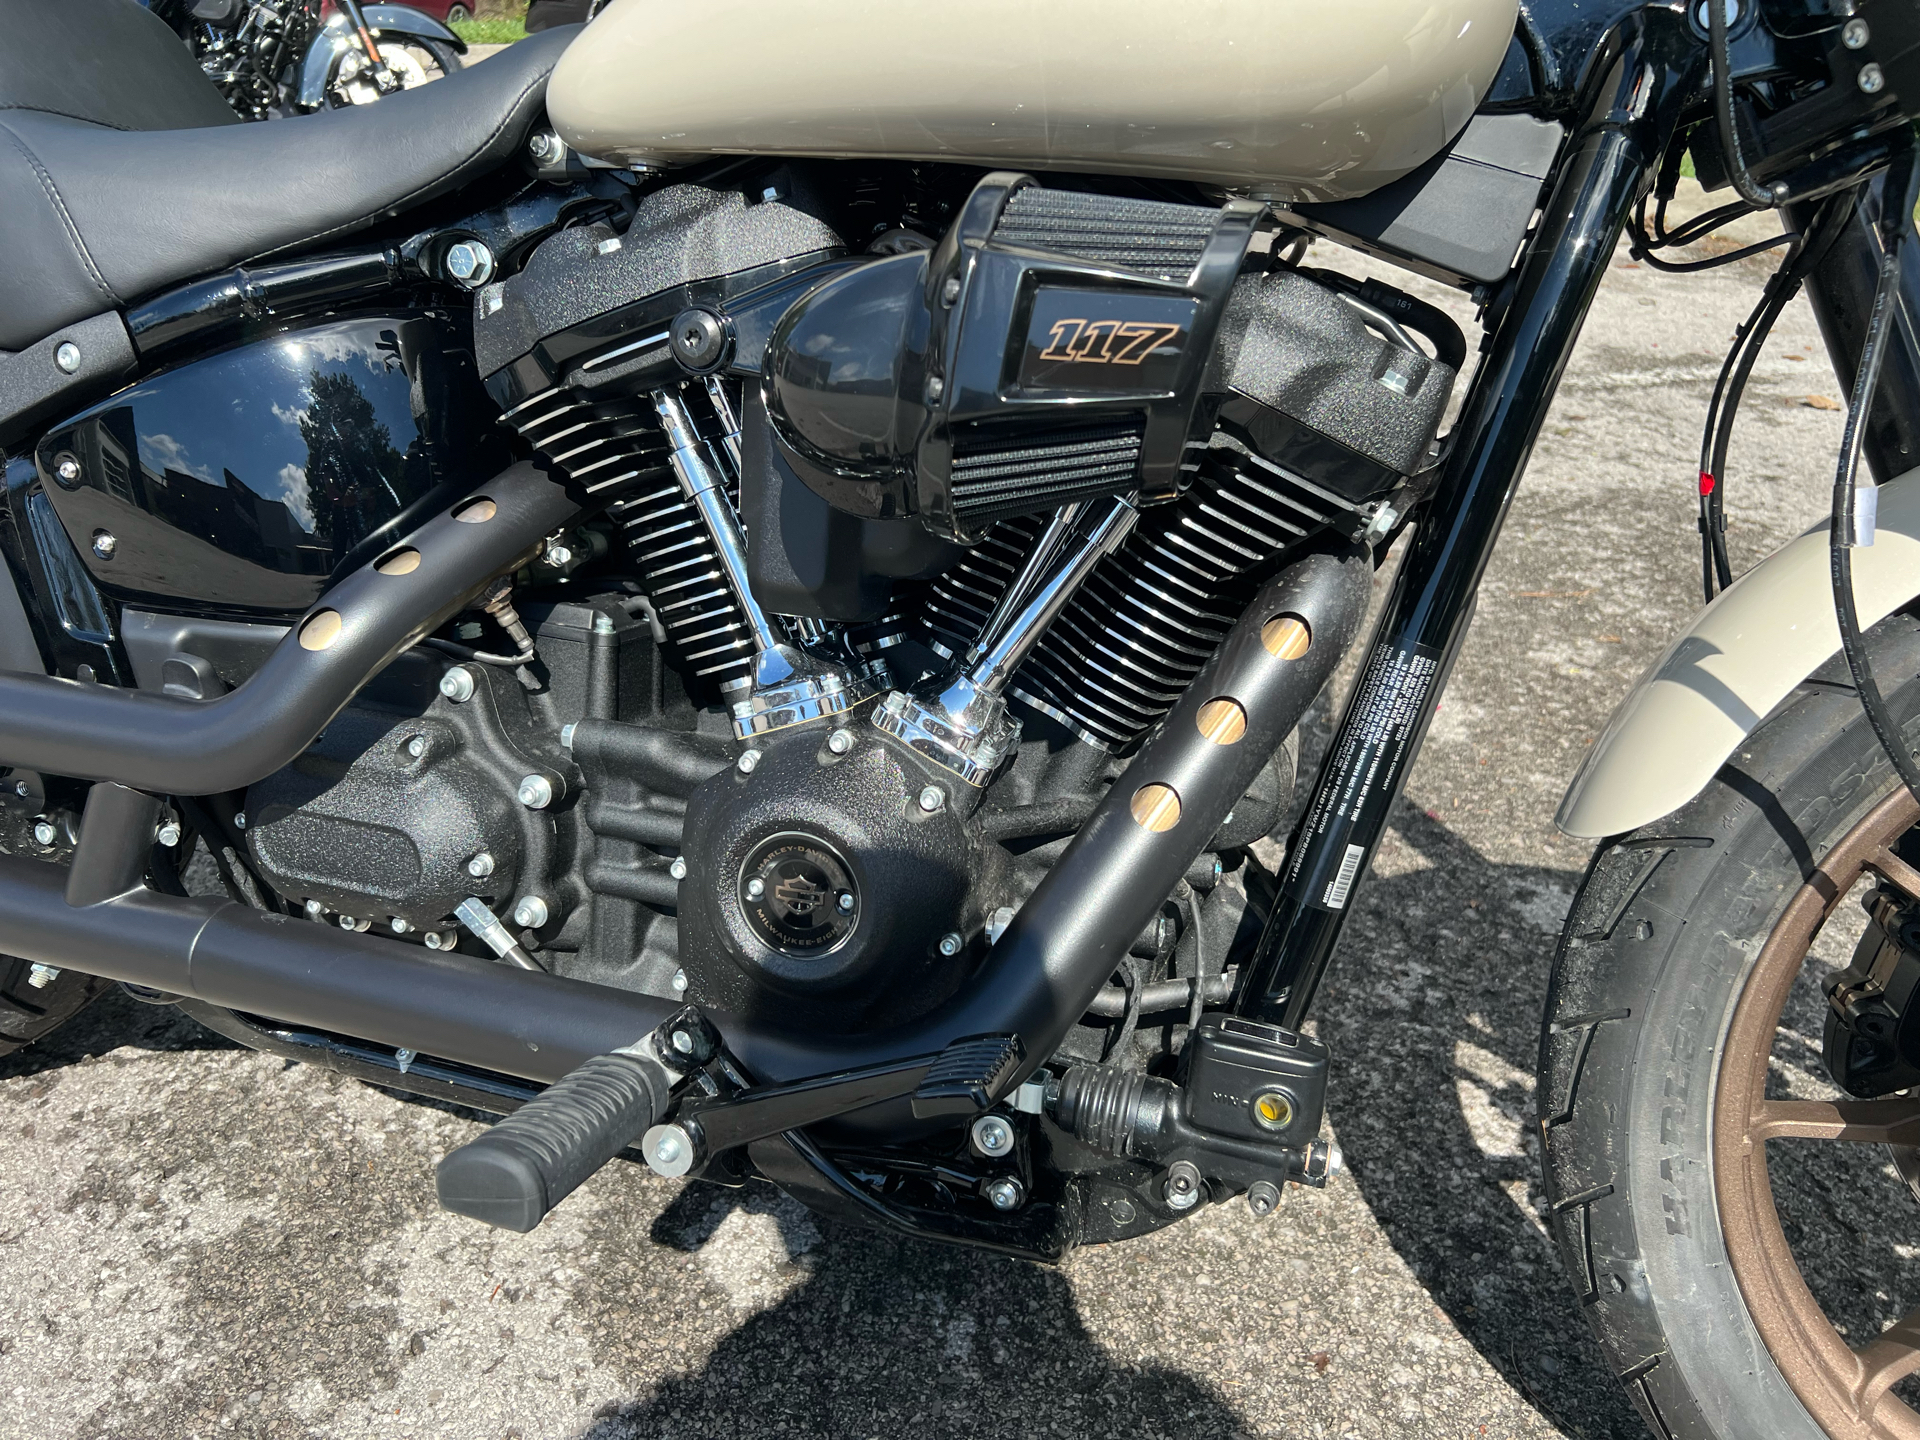 2023 Harley-Davidson Low Rider® S in Franklin, Tennessee - Photo 2